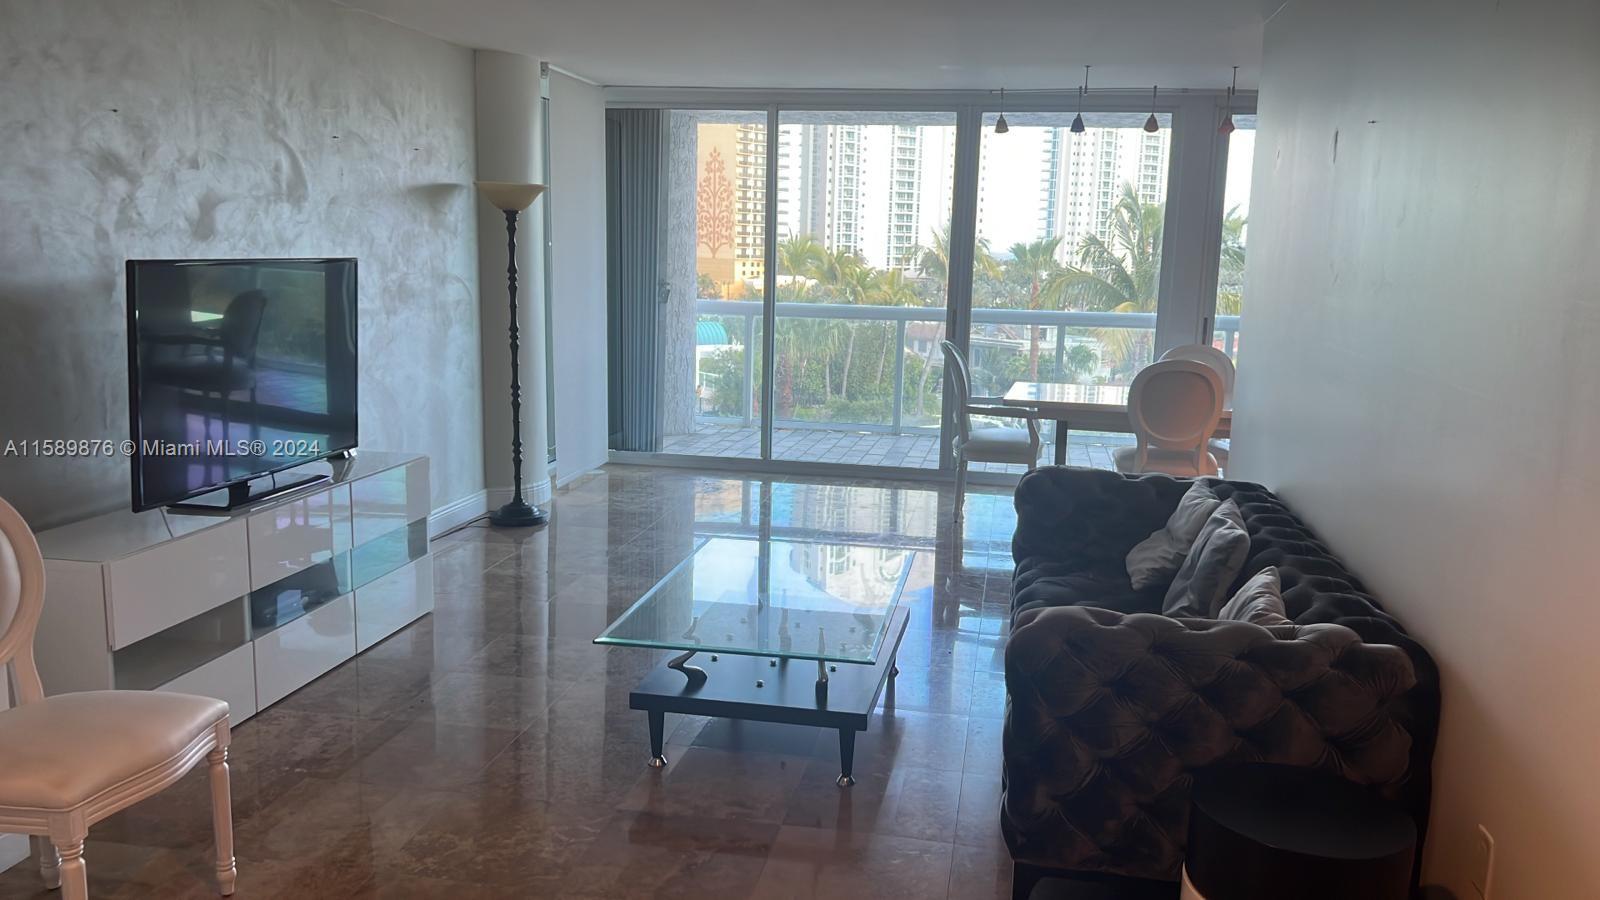 Beautiful and perfectly maintained 2 bedroom in the heart of sunny isles. This special 2 bedroom porcelain floors, laundry room with plenty of storage, beautifully renovated bathrooms and kitchen, multiple living and dining areas, and oversized balcony. Wake up to sunrise on the ocean with eastern views overlooking water and the sunny isles skyline. Unit furniture included exclusive membership to Oceania club!! sauna, steam room, ocean front gym, private beach with butler food service to your chairs! private basketball court and tennis courts, with casual and formal restaurant. Also available for seasonal 6 month rental